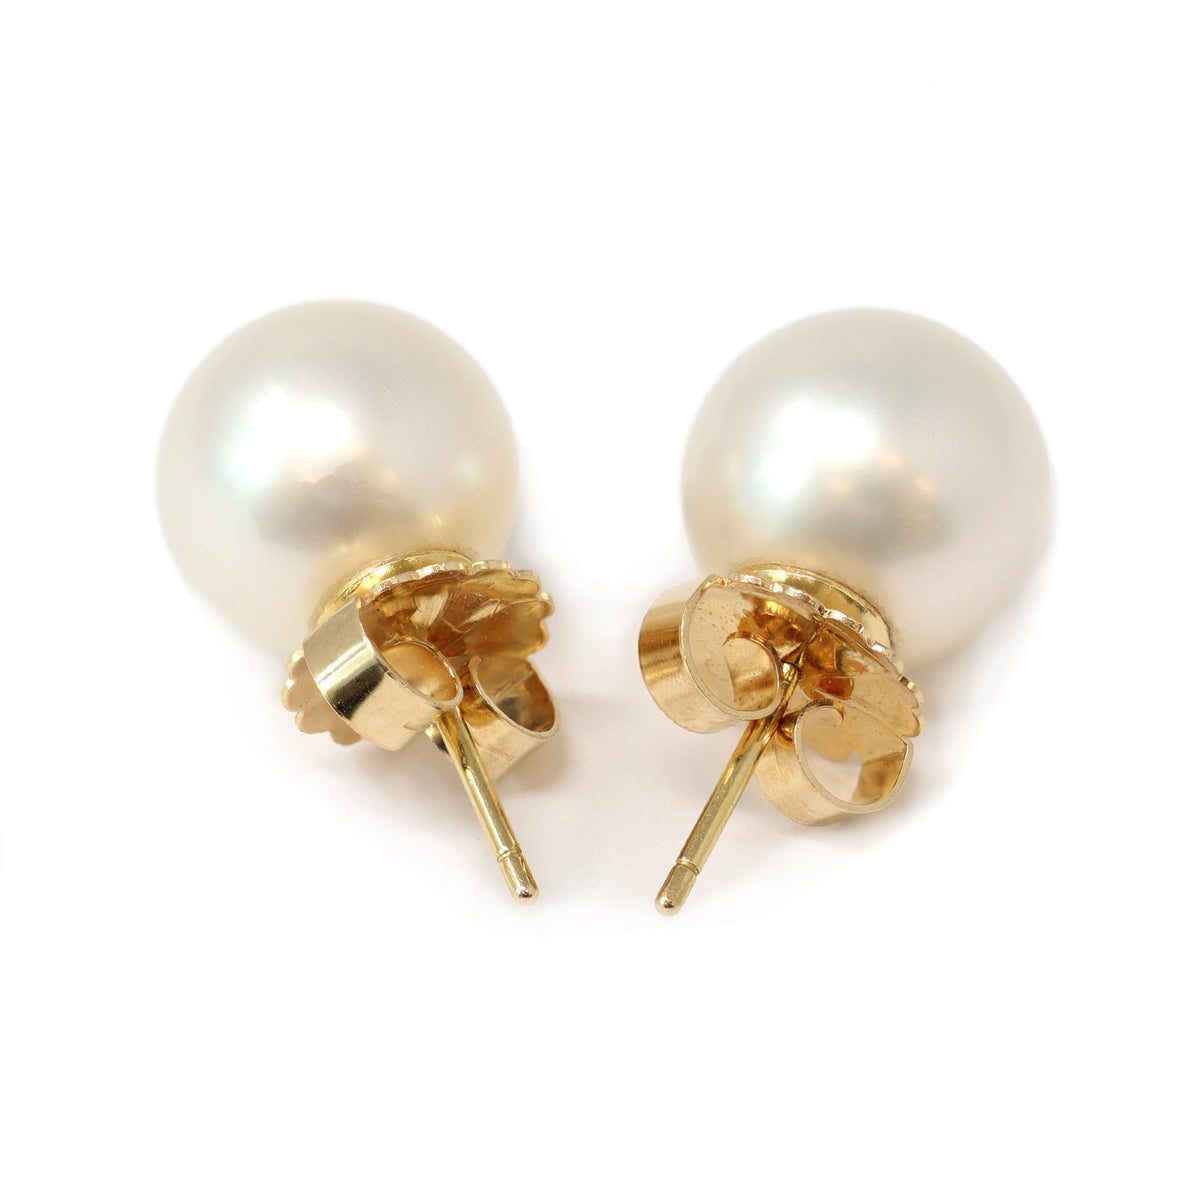 White South Sea Pearl Stud Earrings in 18 Karat Yellow Gold back view